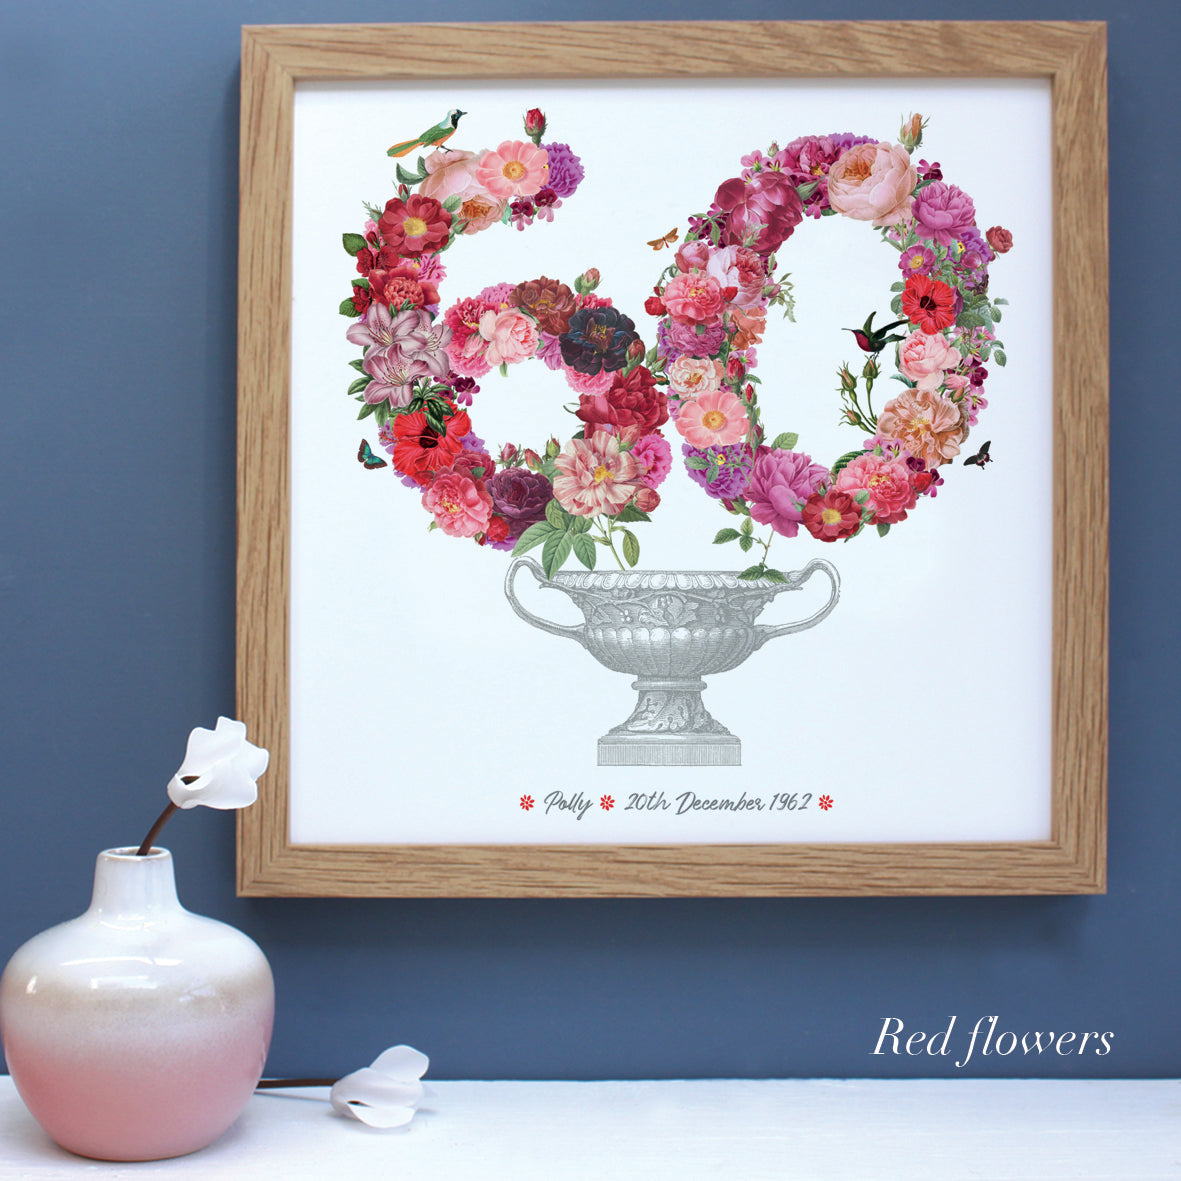 60th birthday gift with red flowers in an oak veneer frame